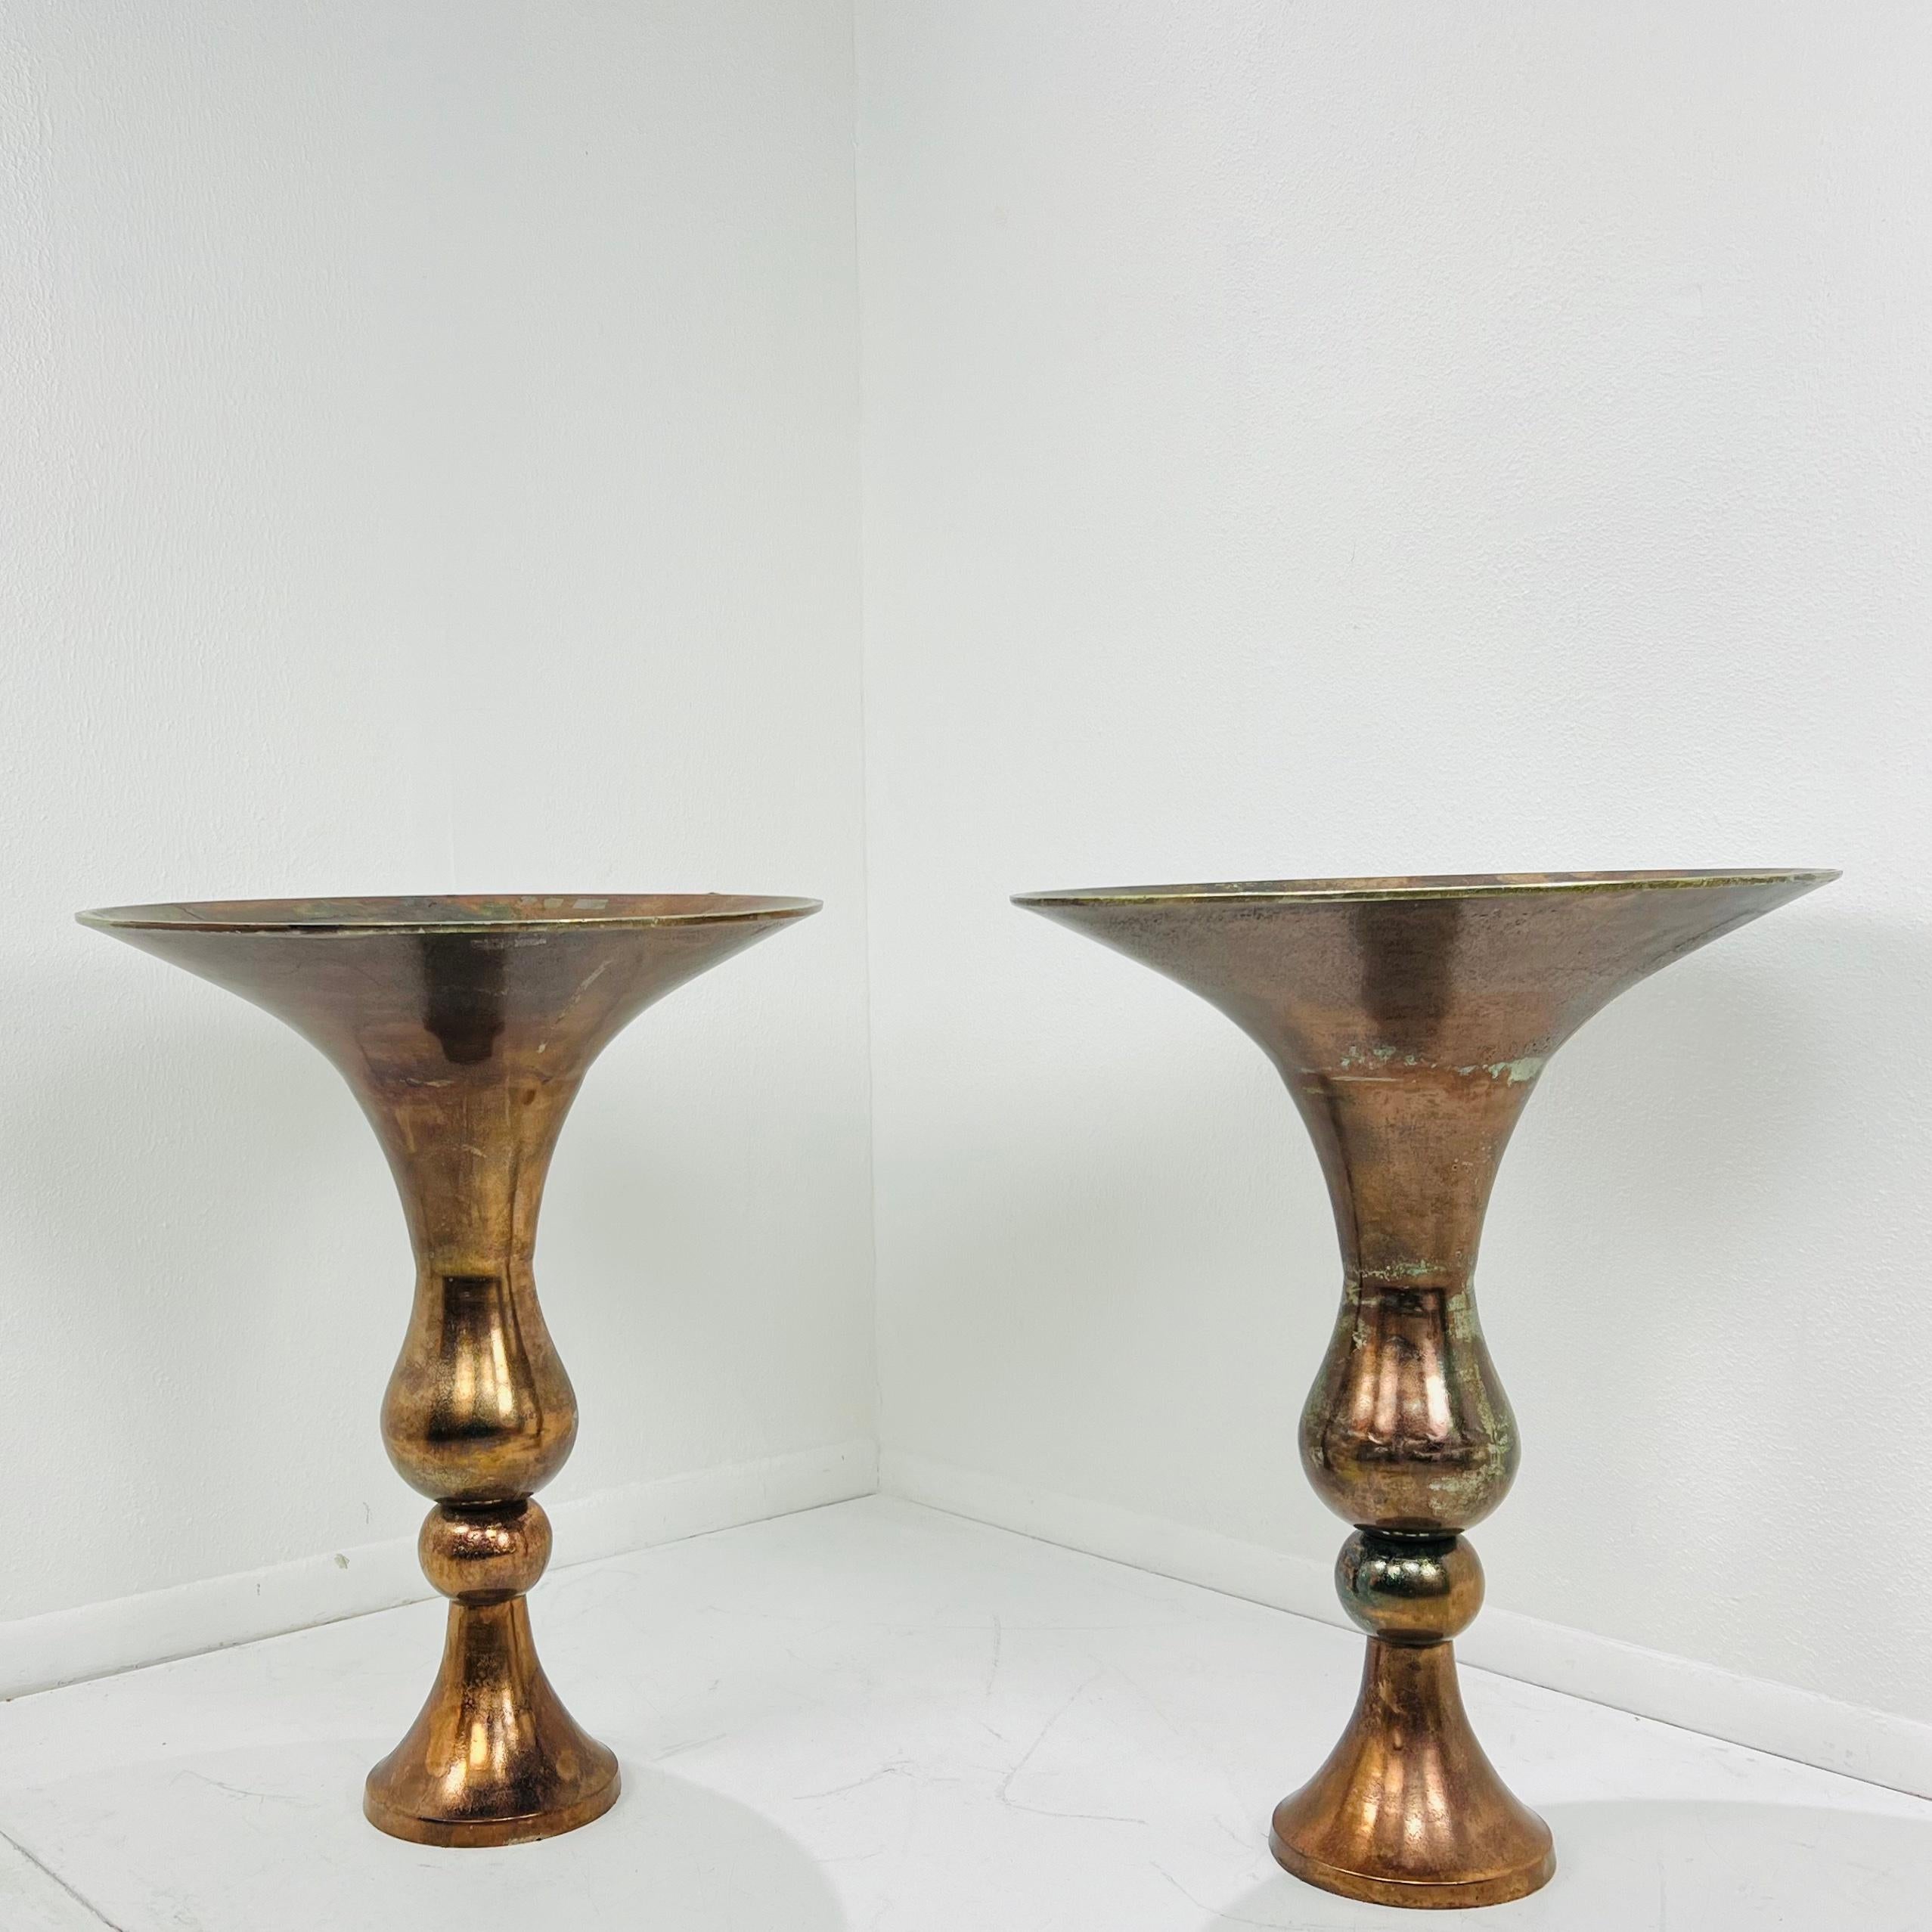 Pair of Large Copper Finish Metal Floor Vases In Good Condition For Sale In Dallas, TX